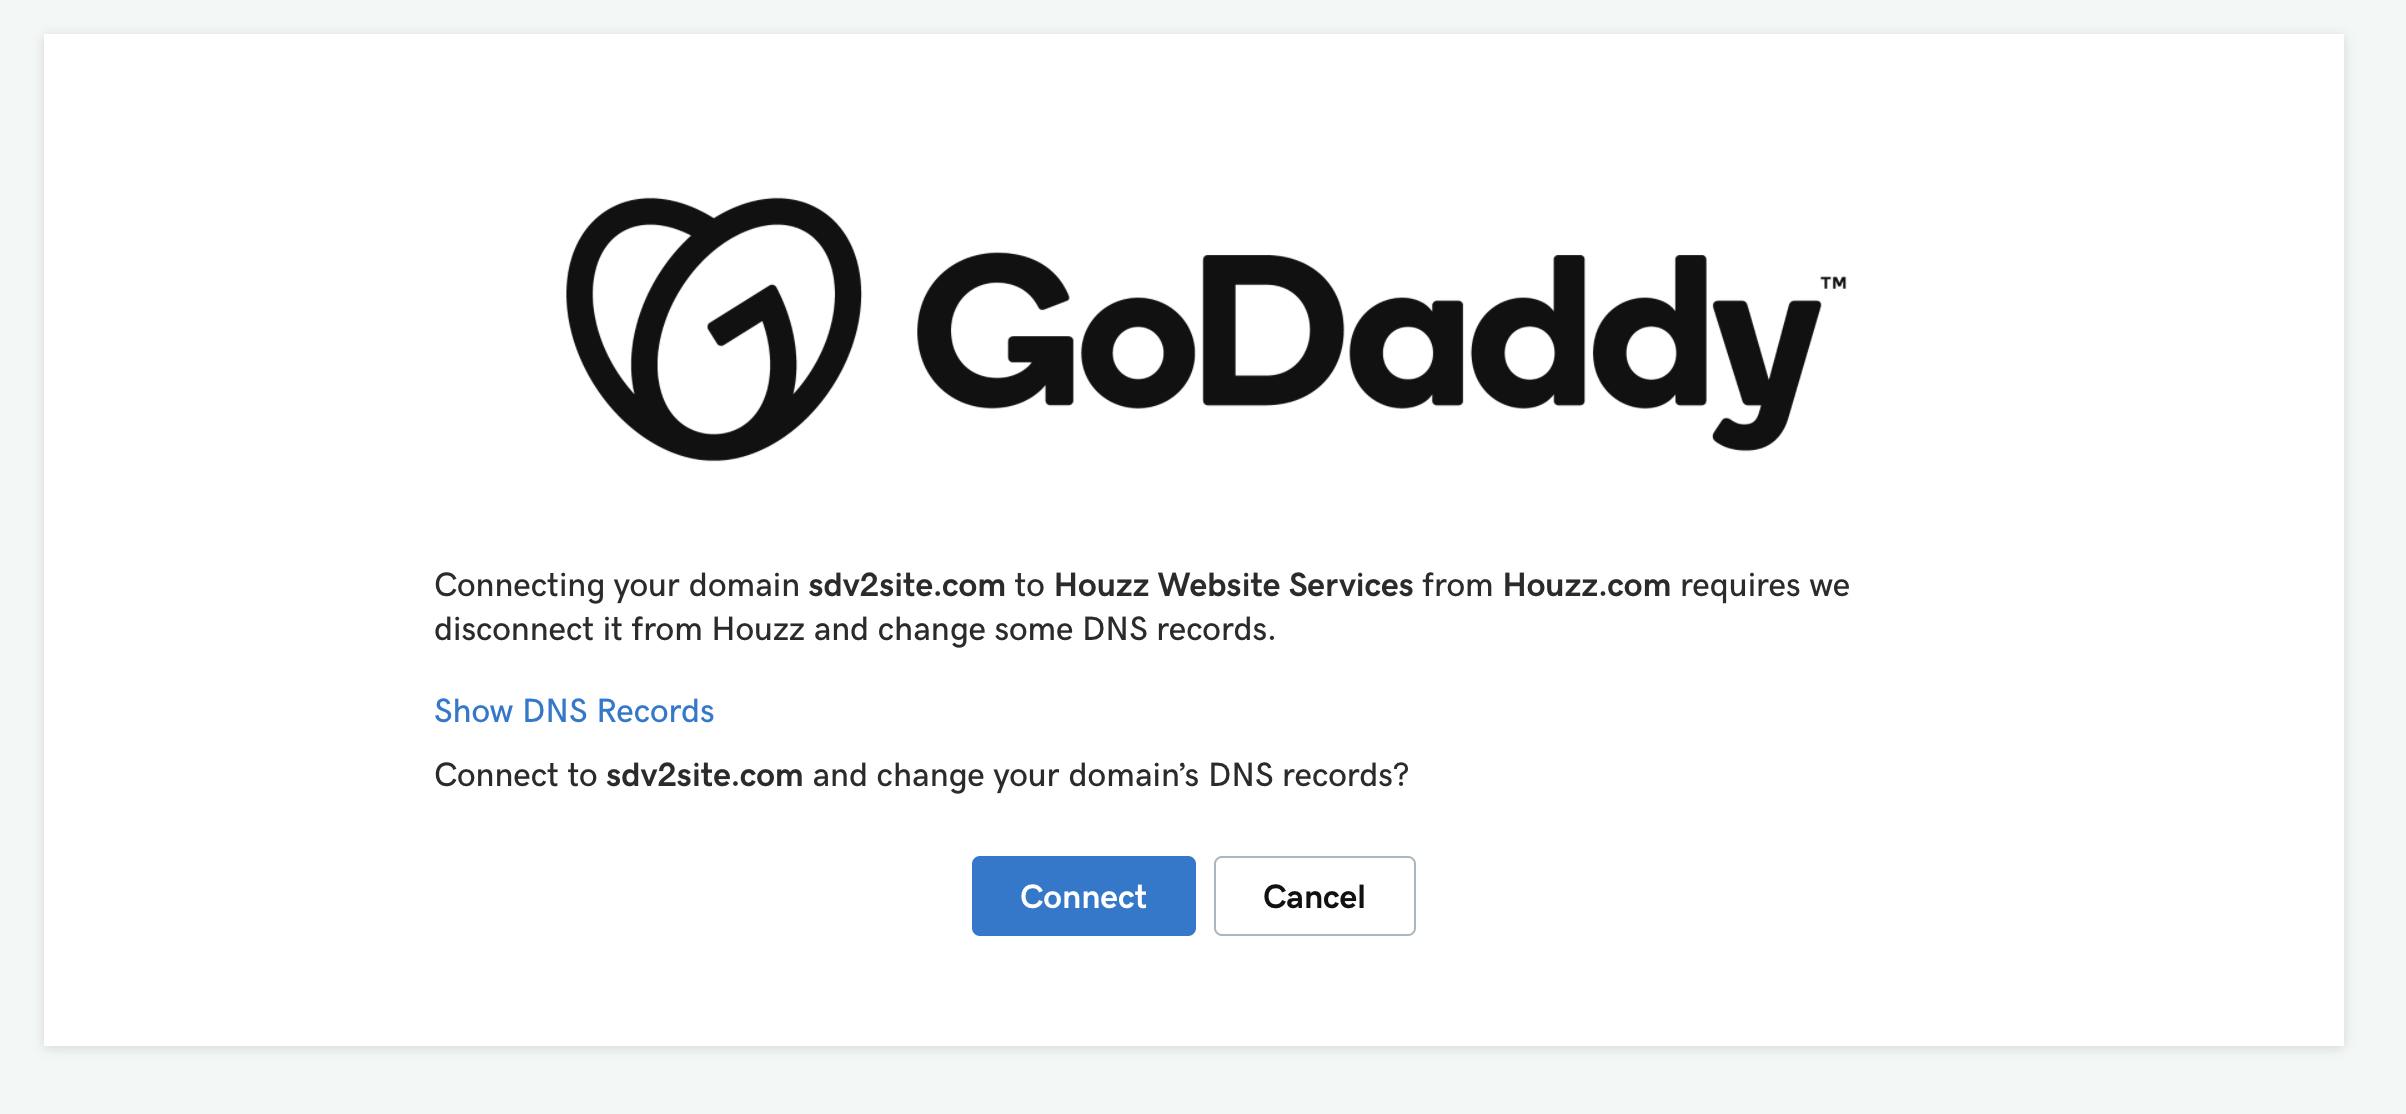 Houzz DomainConnect makes it easy to update your GoDaddy DNS settings. 